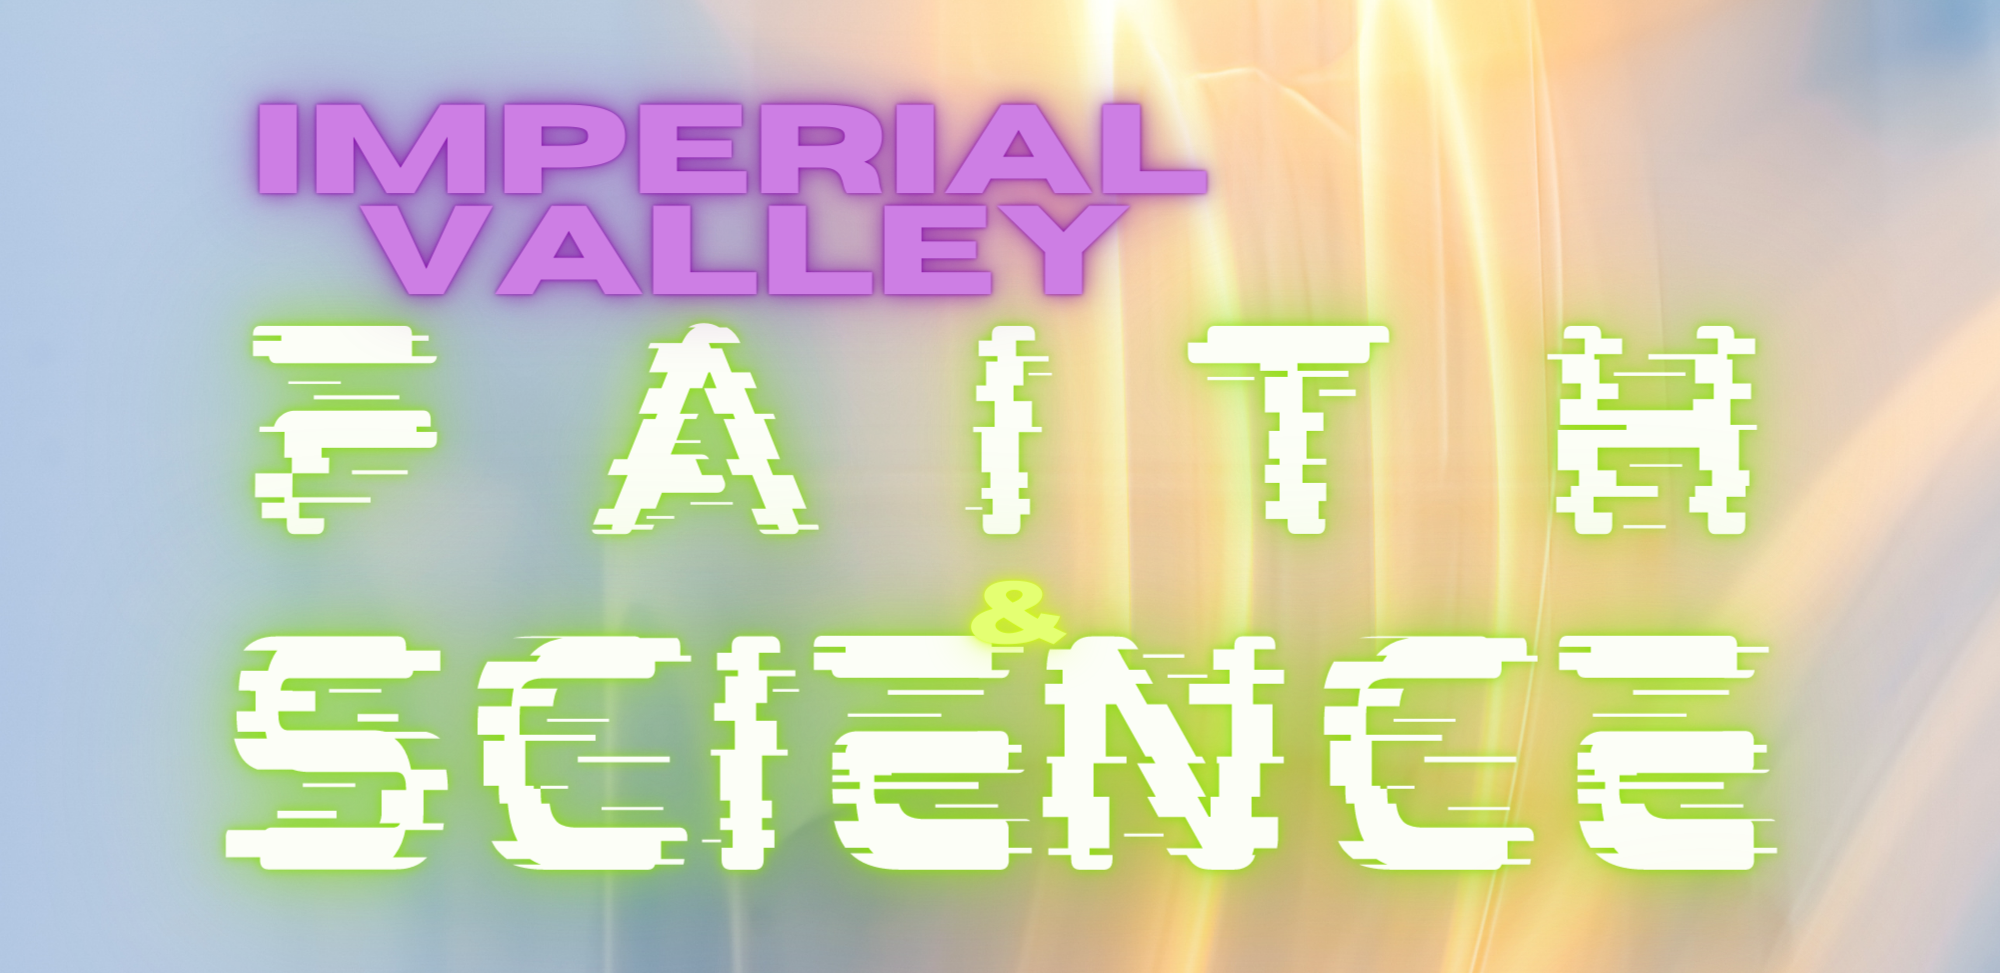 Imperial Valley Faith & Science Practical Workshop # 1